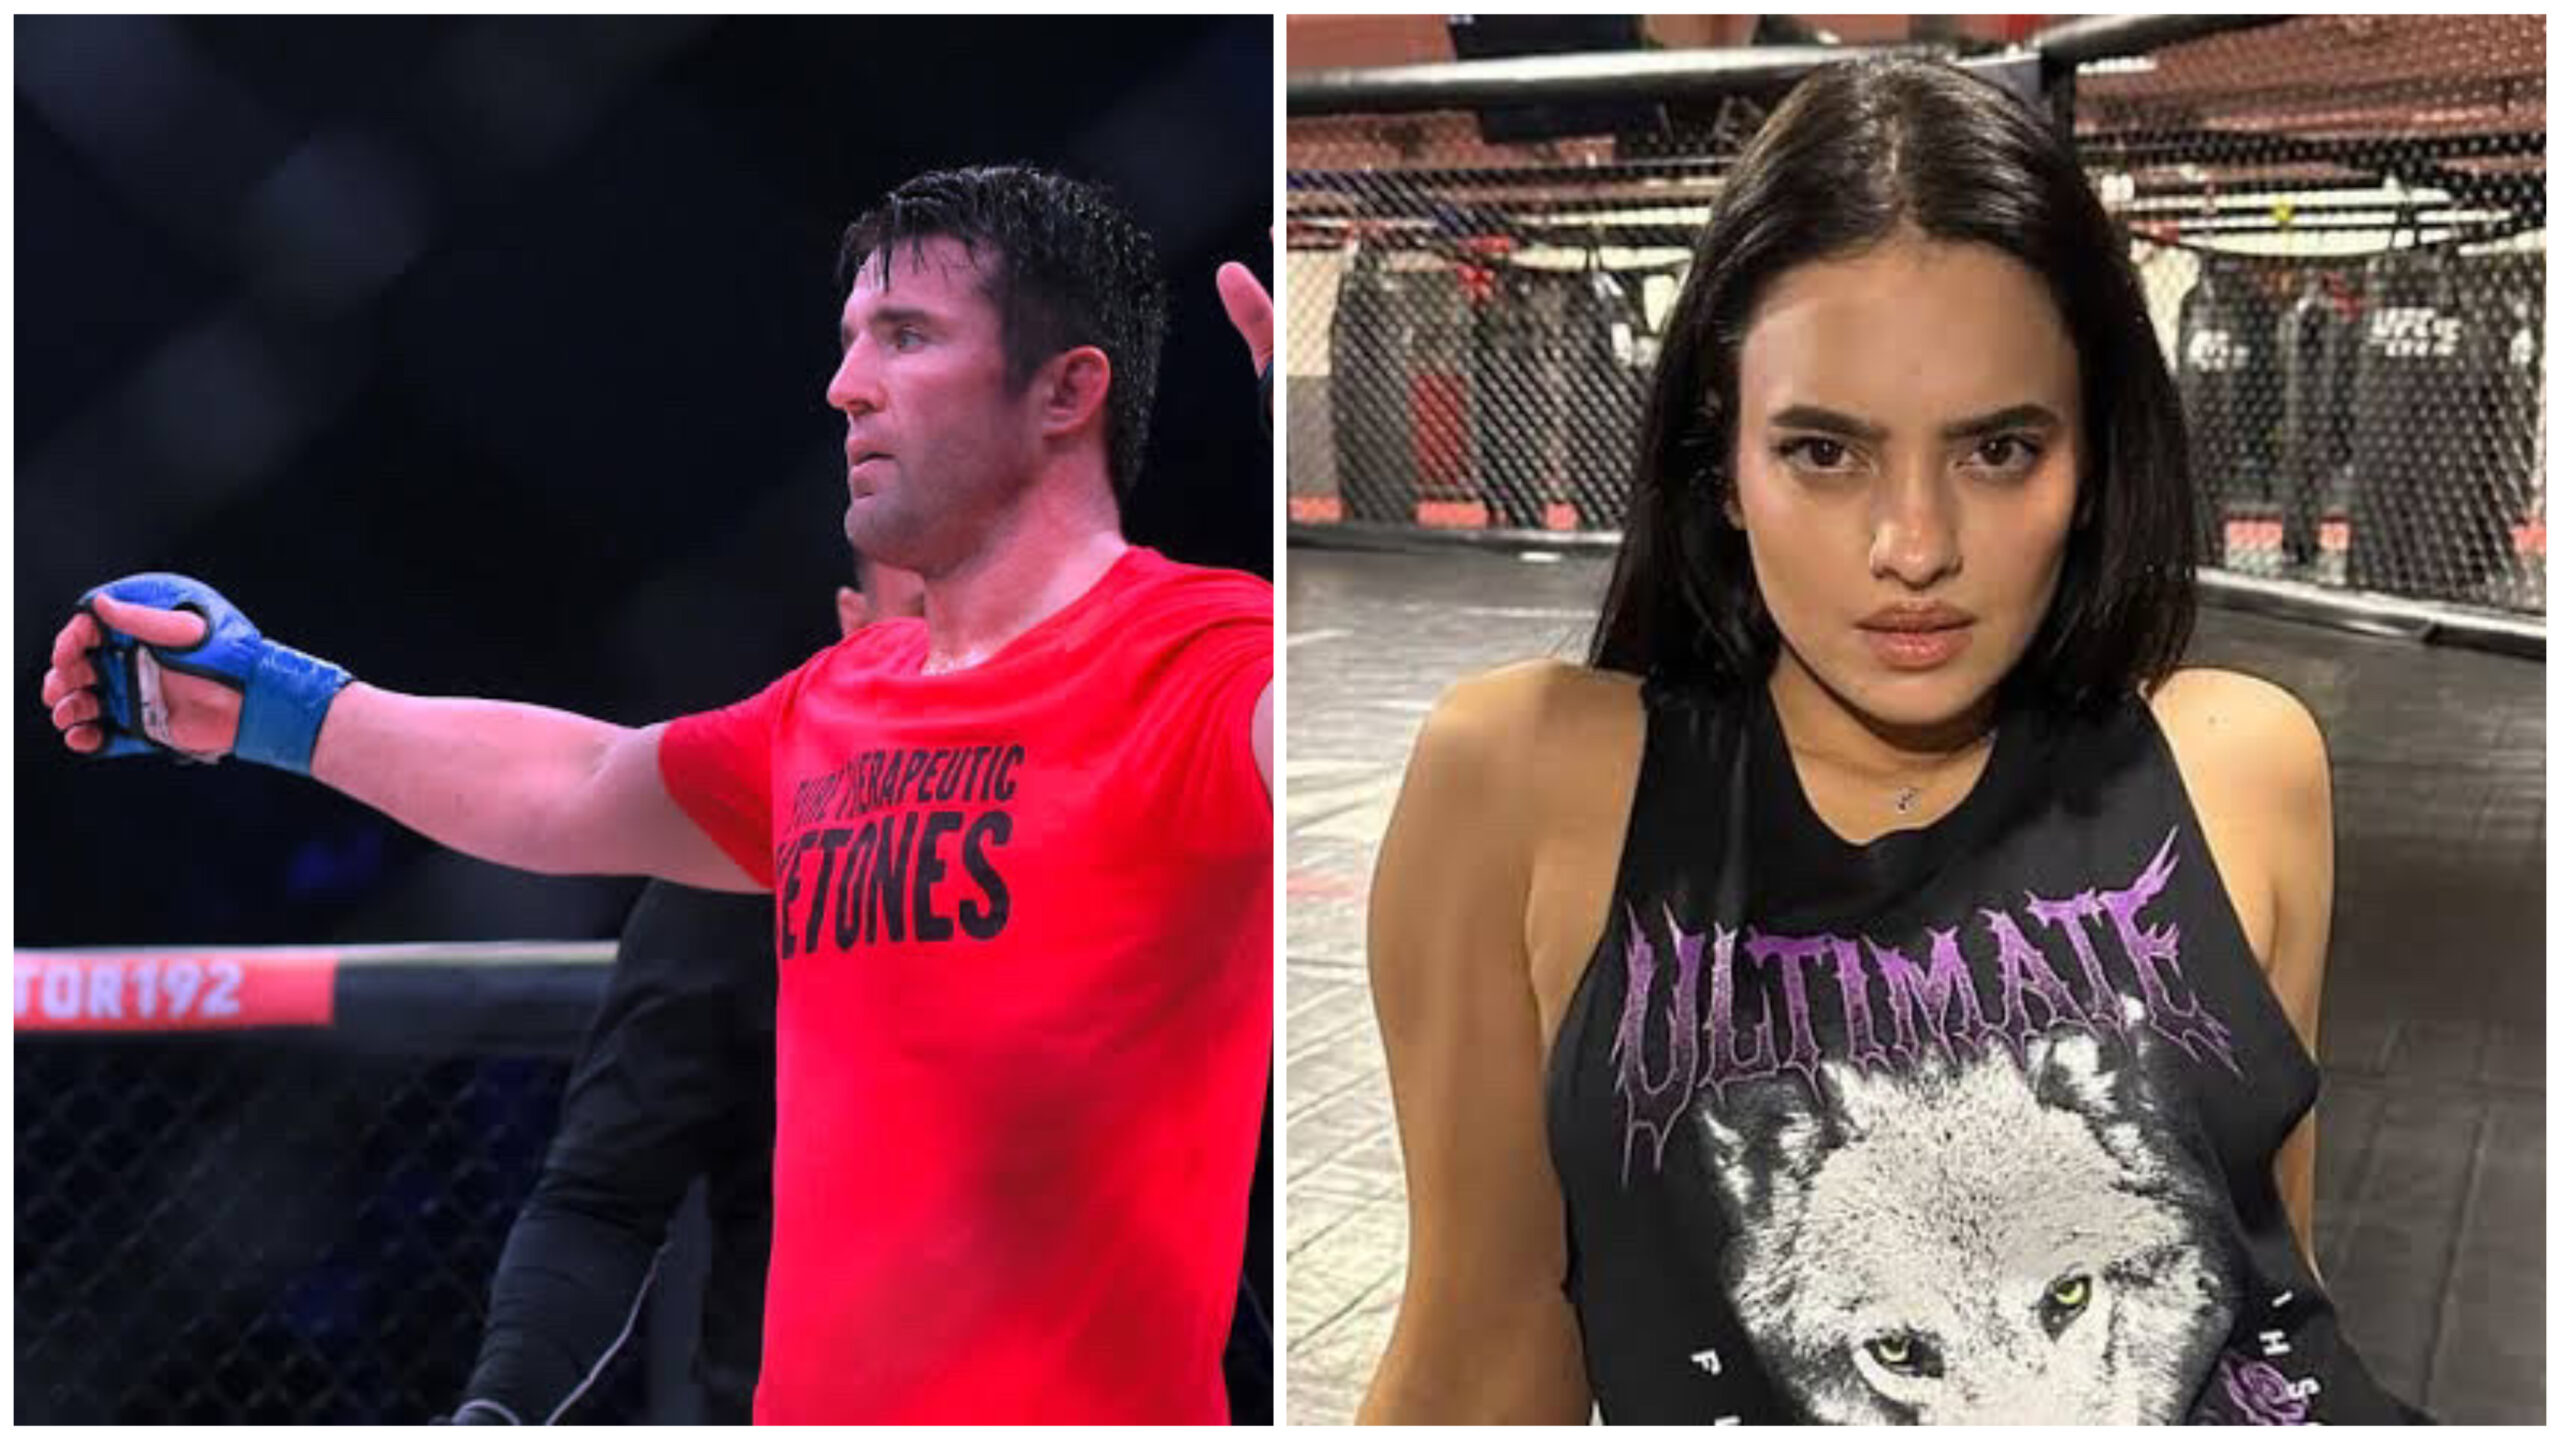 Chael Sonnen Confirms ‘Checking In’ as Nina Marie Danielle Looks Out For Haters In Real Life